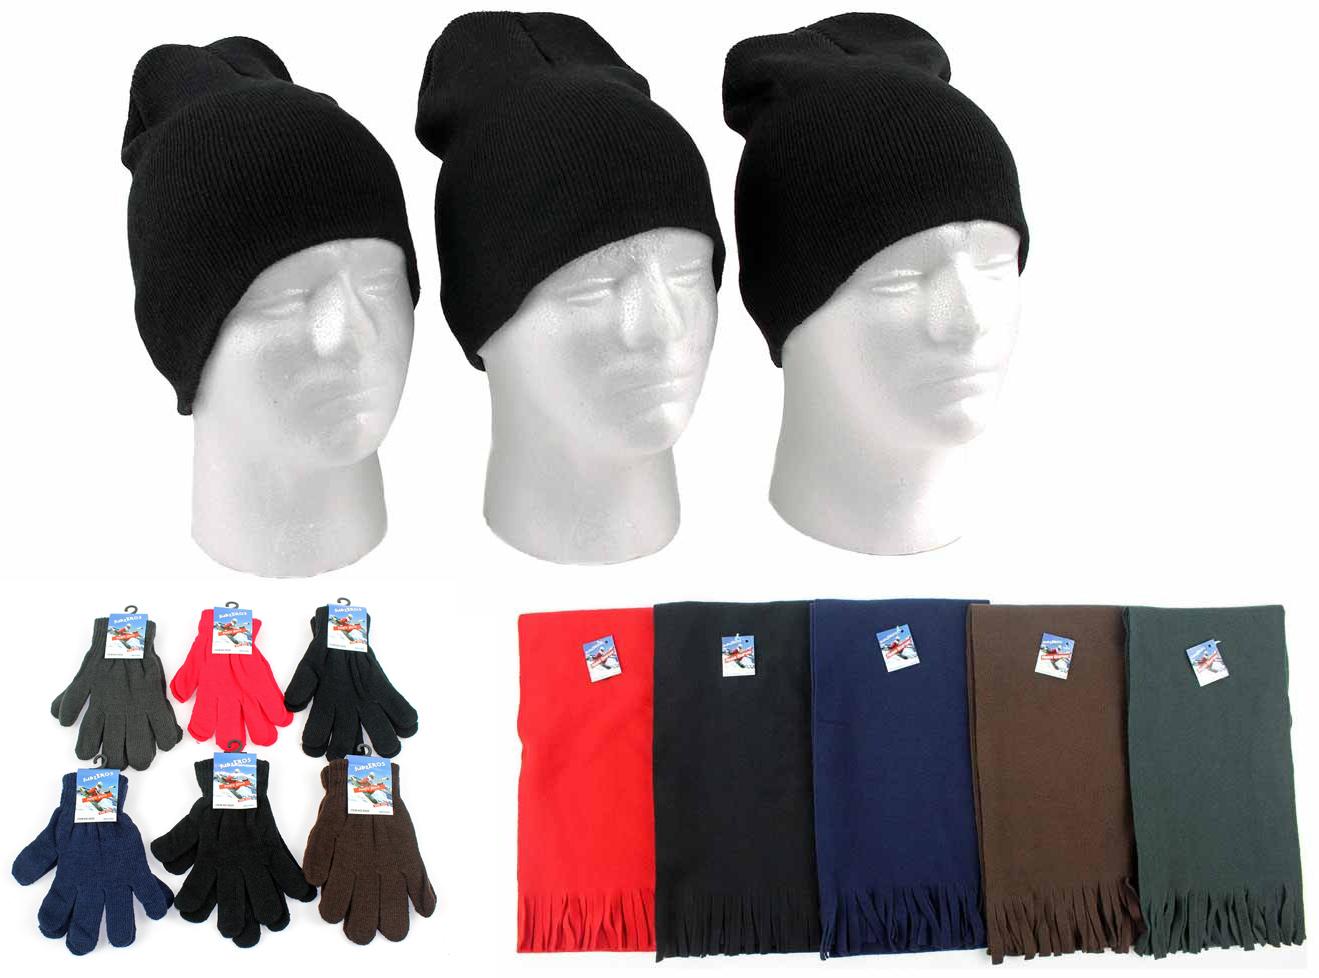 Adult Beanie Winter Knit Hats, Adult Magic Gloves, and Adult Solid Scarves Combo Packs